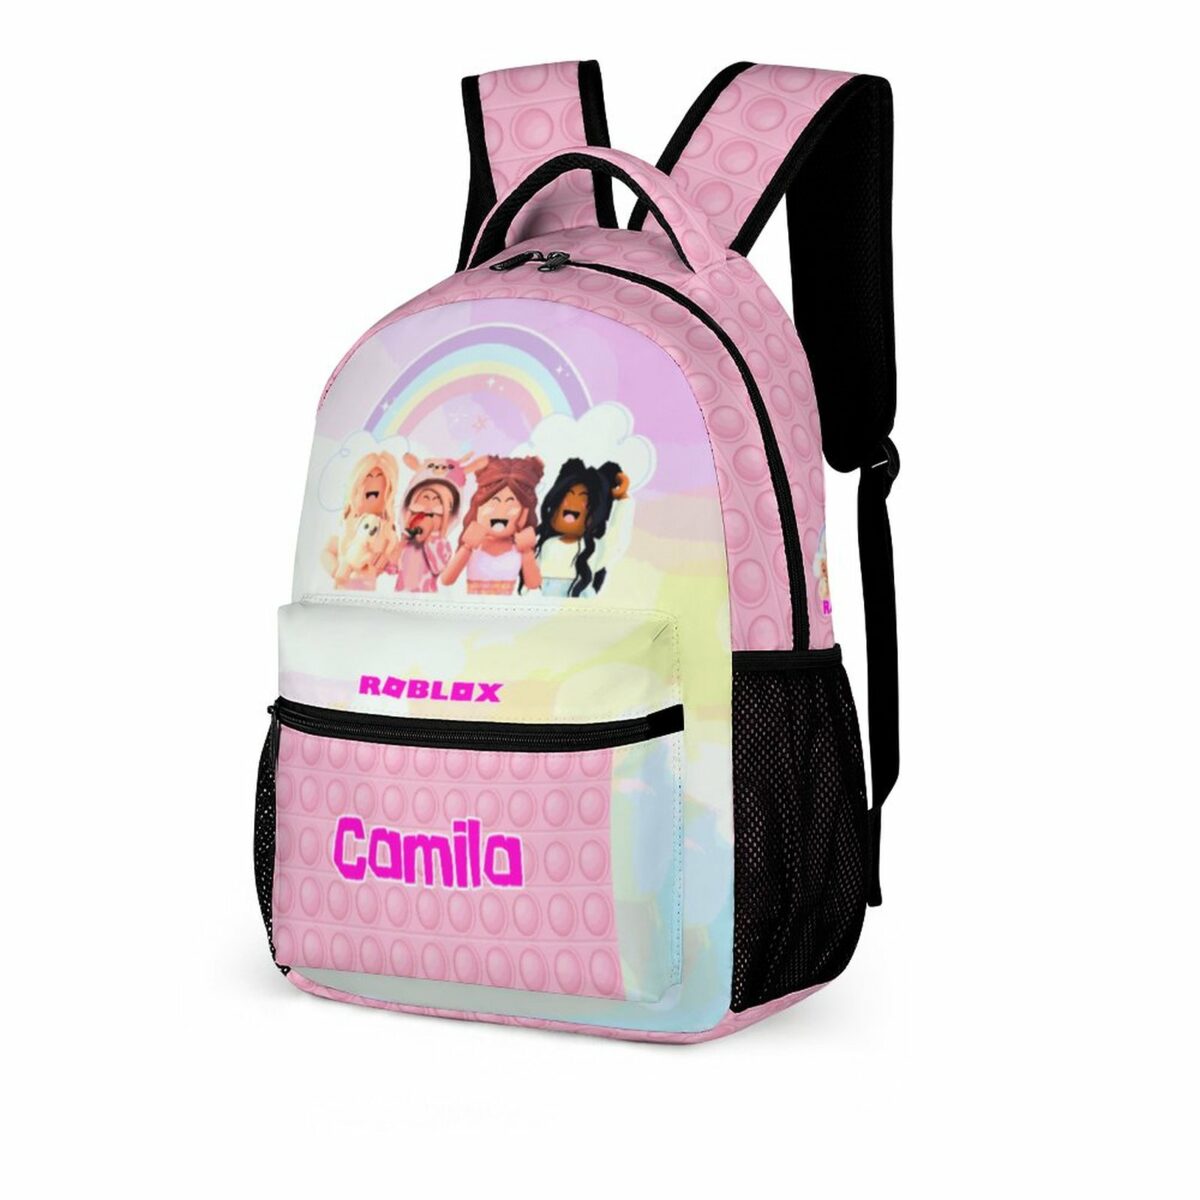 Personalized Name, Pink Roblox Girls Backpack with Avatars Characters on front Cool Kiddo 24